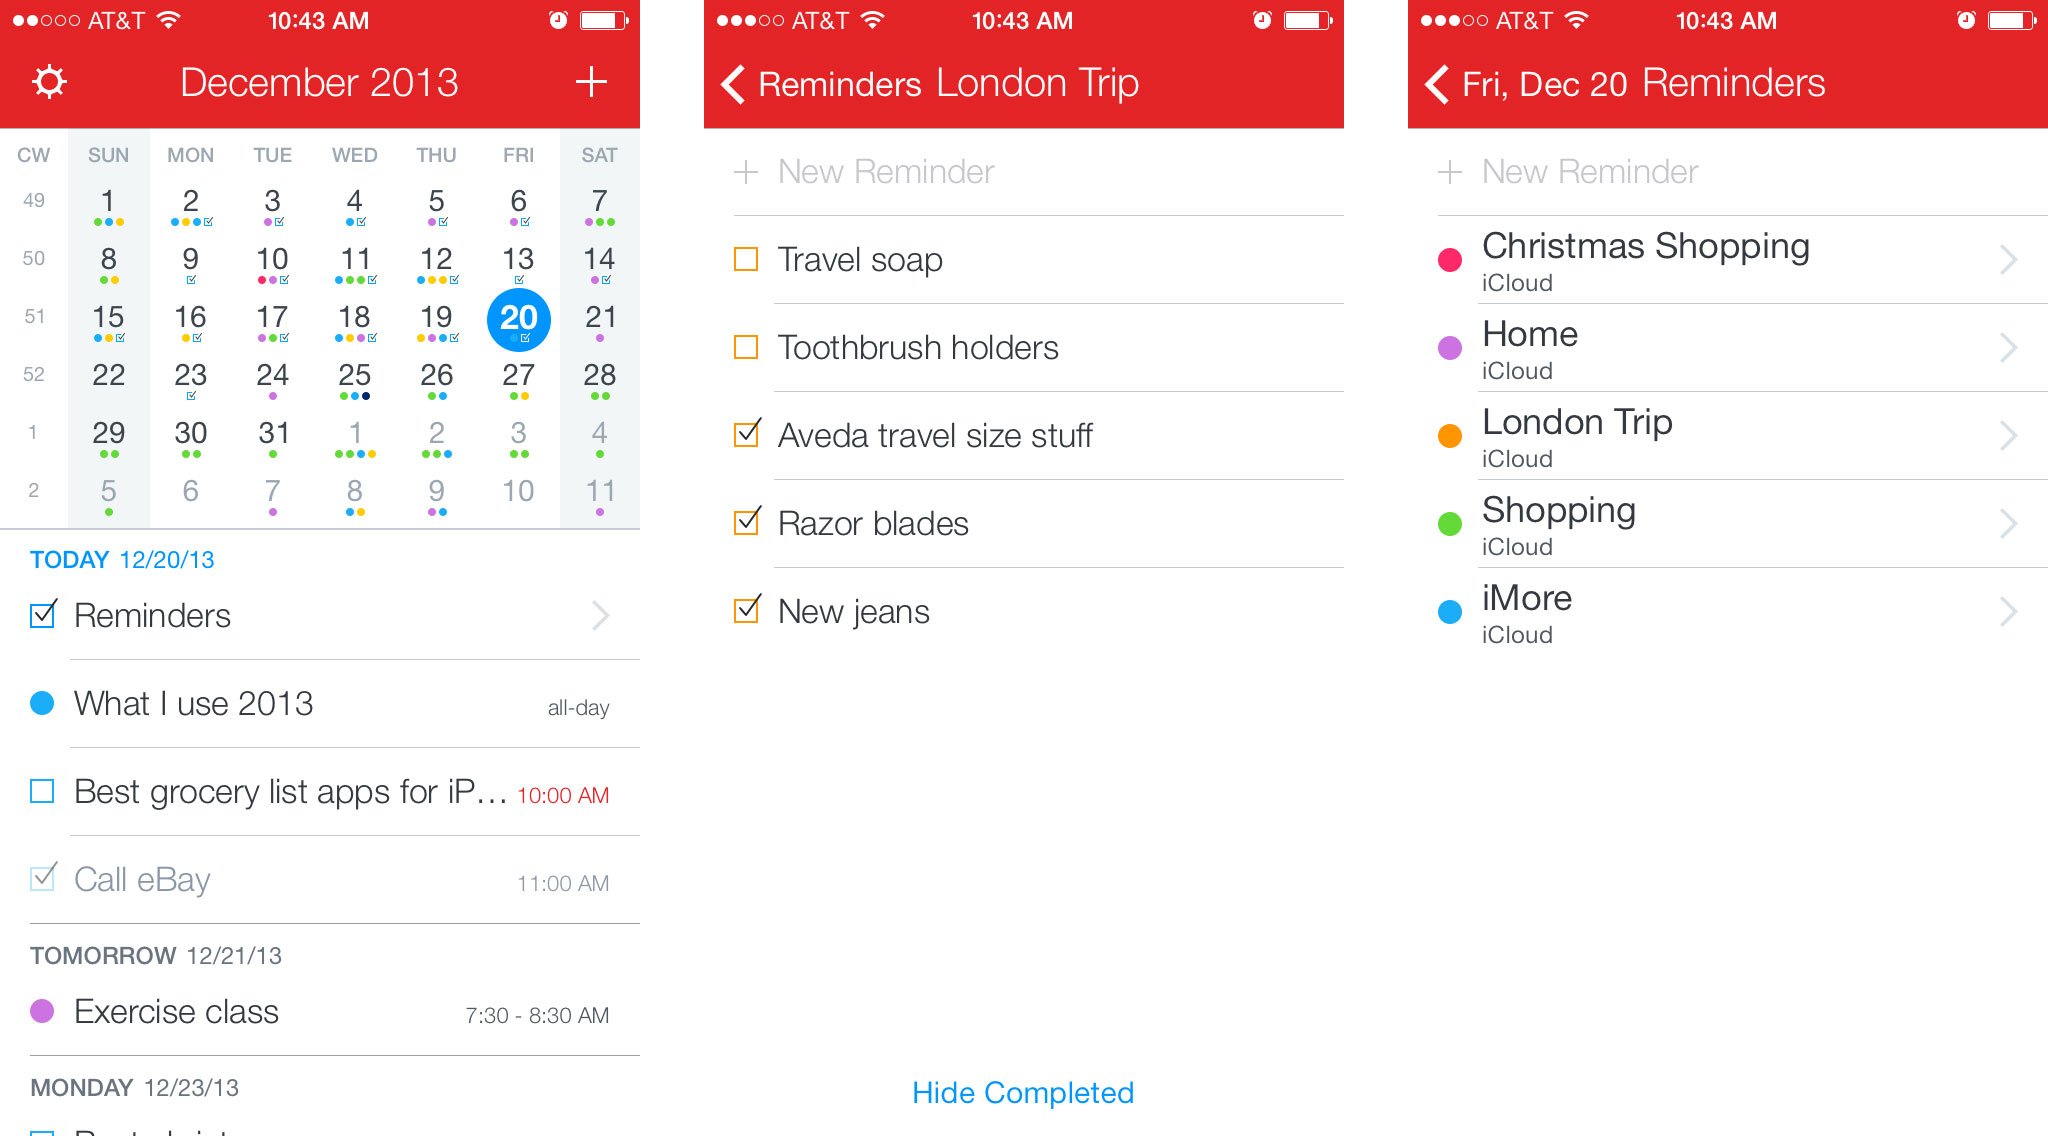 Best shopping and grocery list apps for iPhone: Fantastical 2